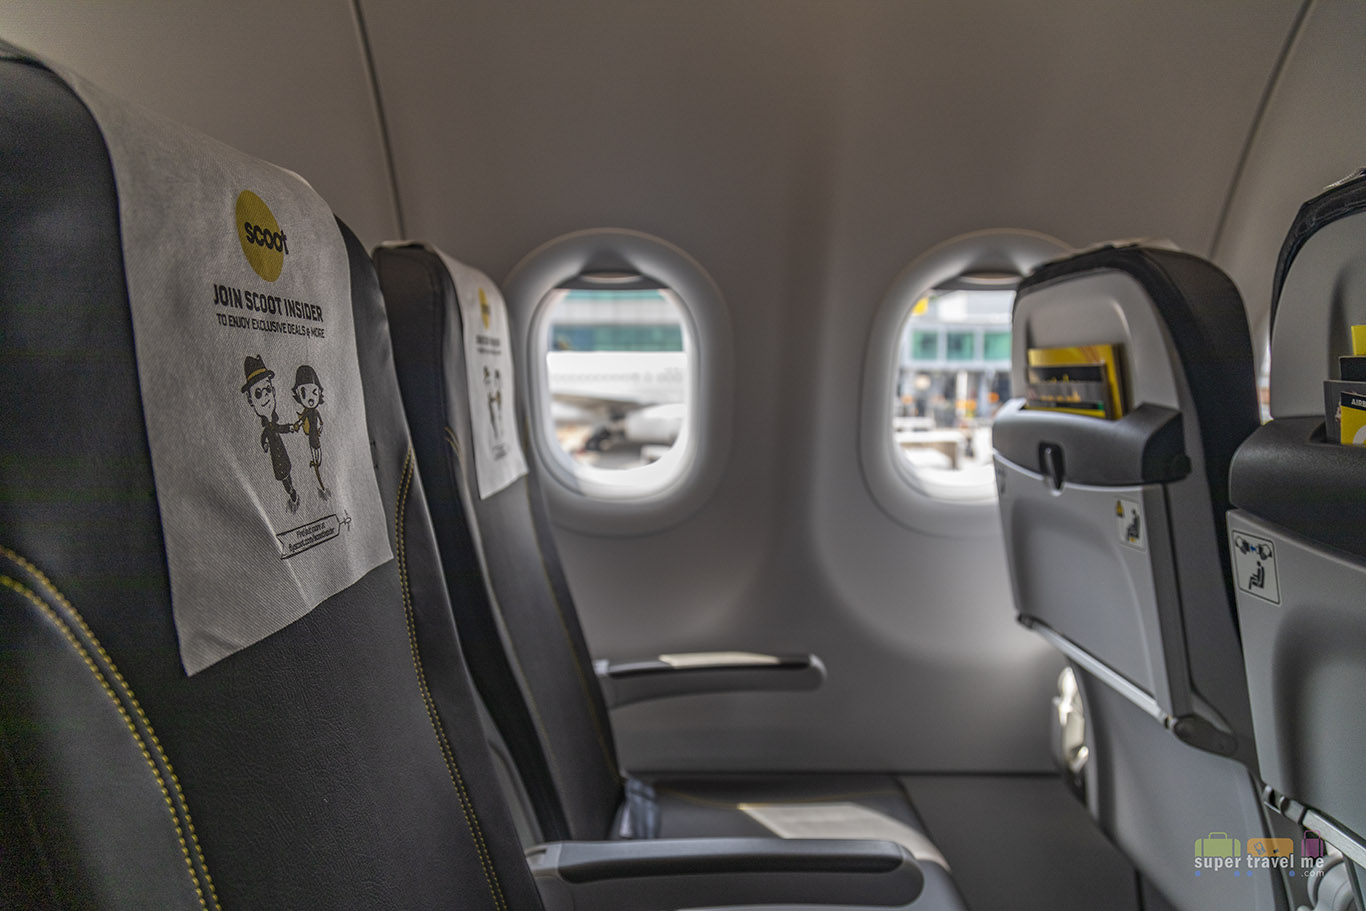 Inside Scoot's first A320neo aircraft 9V-TNA